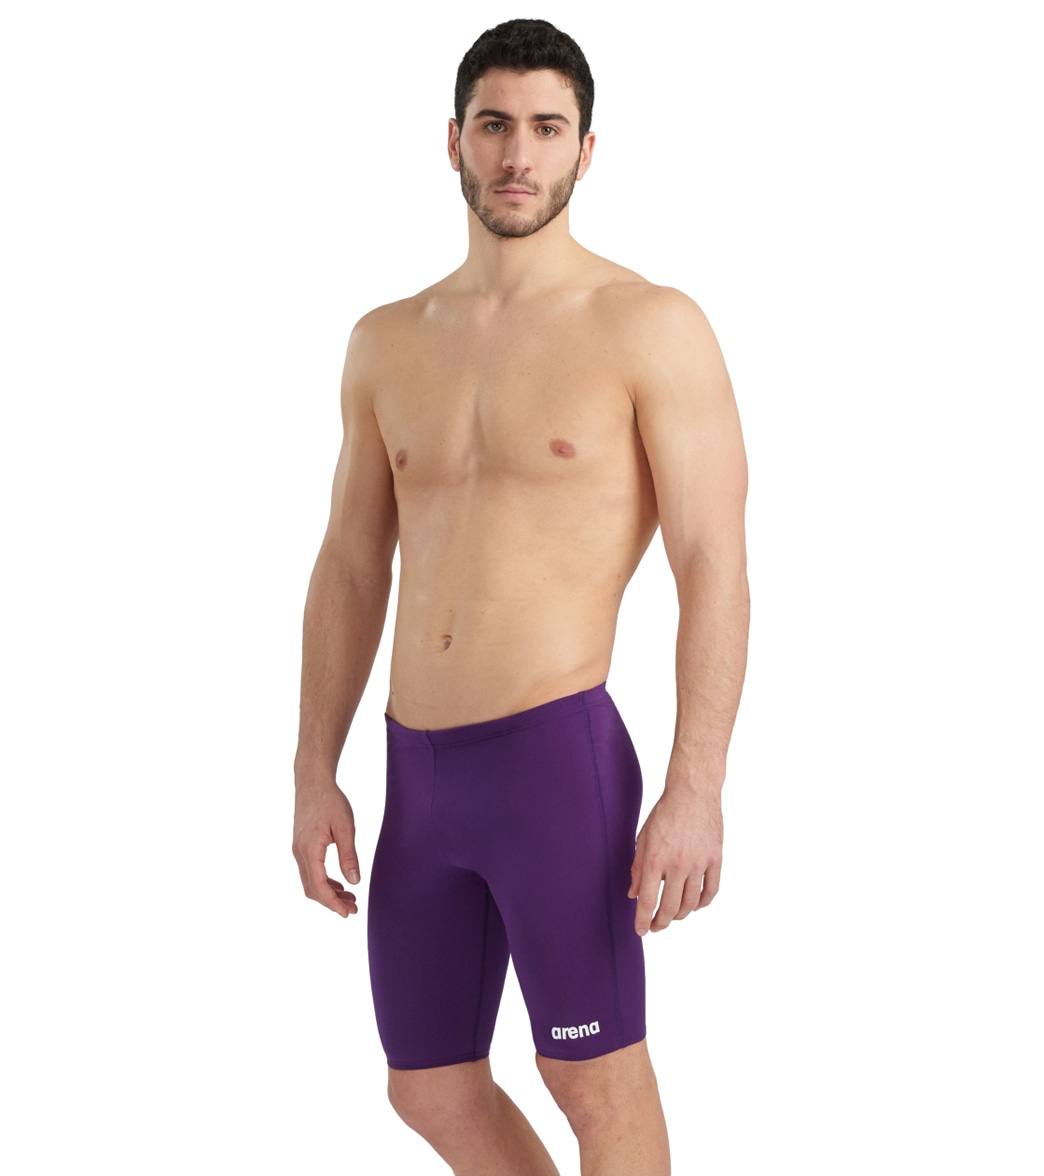 Arena Men's Solid Jammer Swimsuit - Plum/White 18 Polyester - Swimoutlet.com